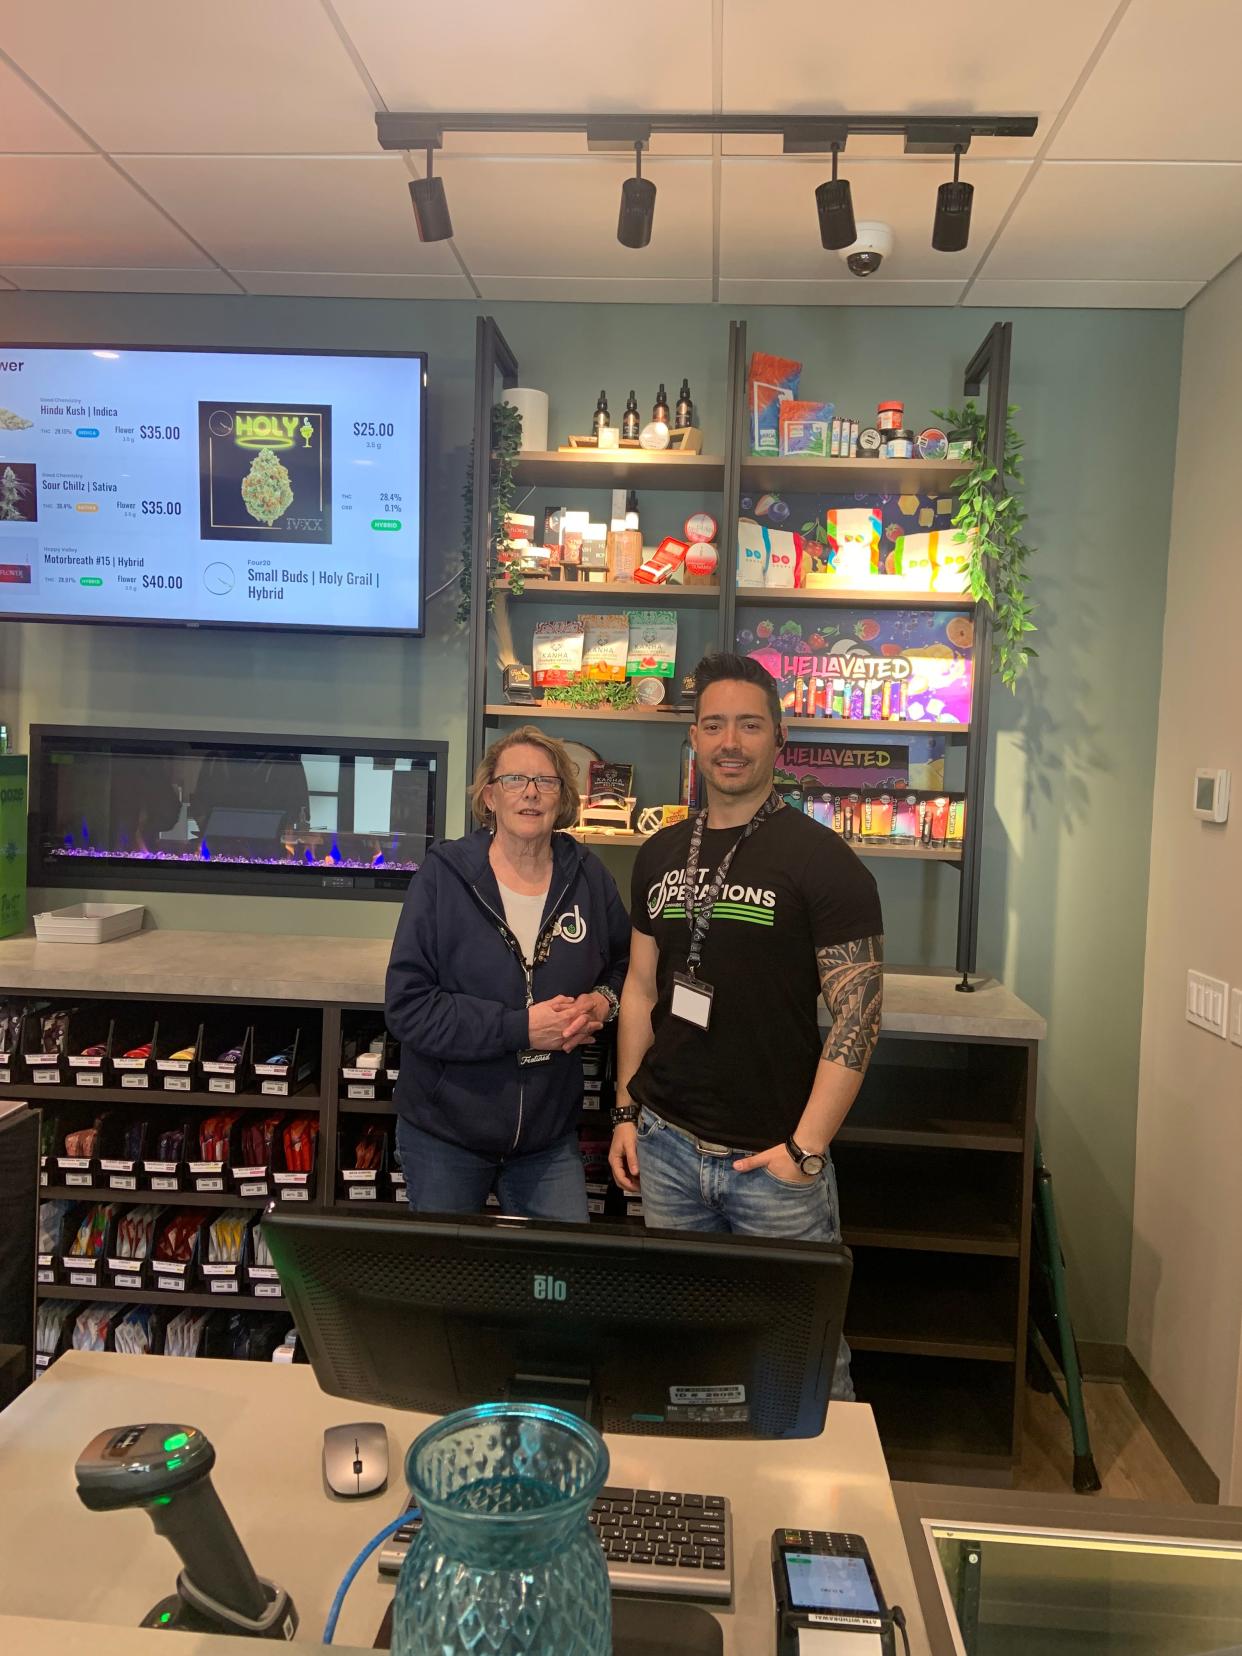 Susan Lee-Waite, a budtender, and Daniel Lencioni, district manager, welcome customers to the first day of operations a Joint Operations at Timpany Crossroads in Gardner. The city's second recreational marijuana dispensary opened on Sunday, 4/21.